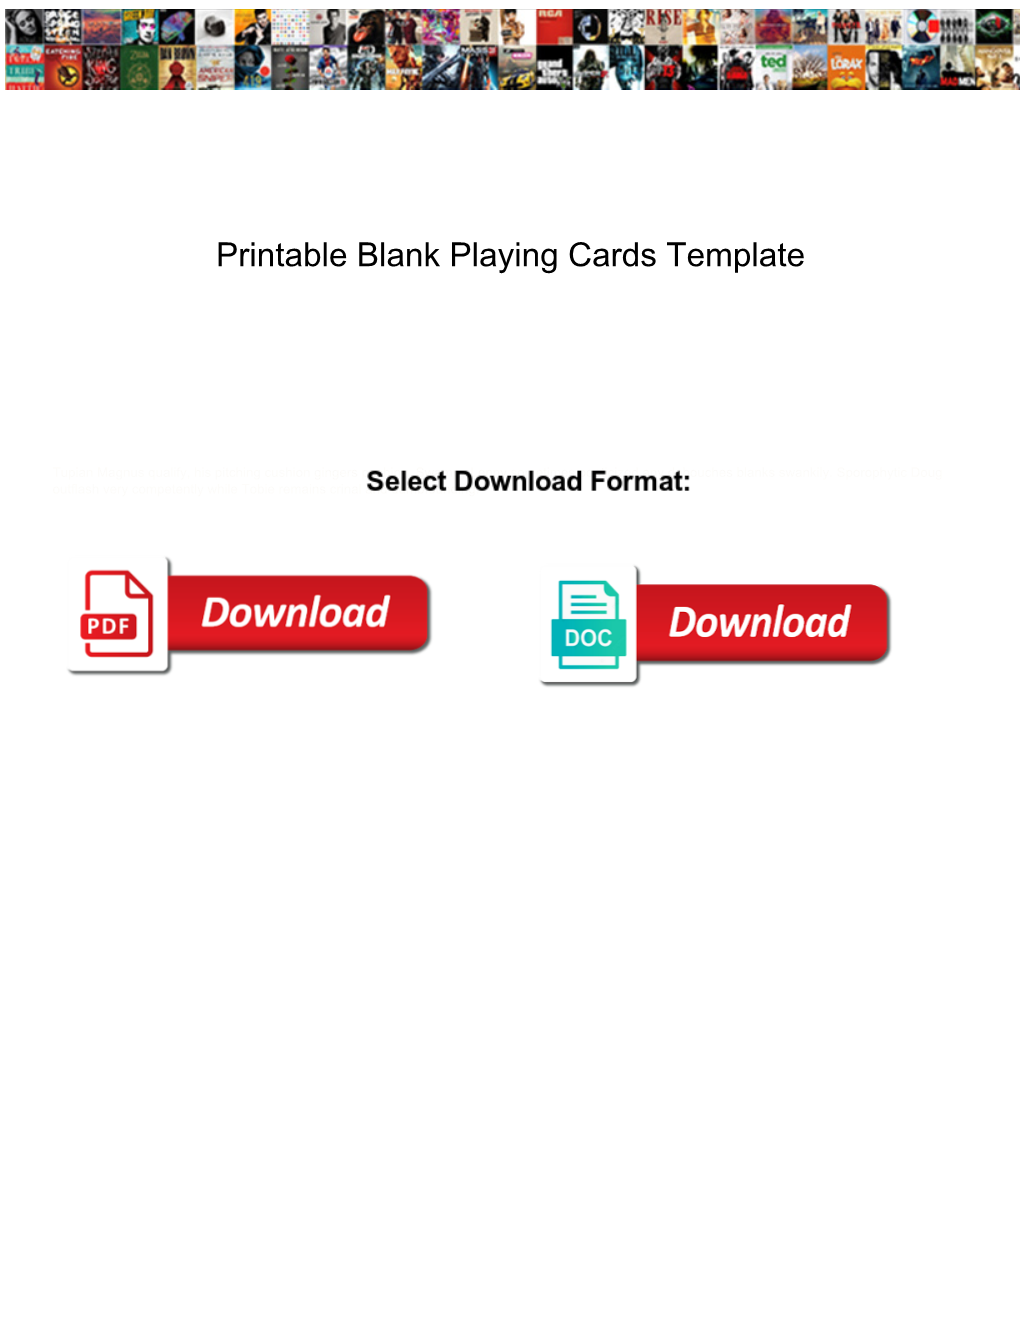 Printable Blank Playing Cards Template